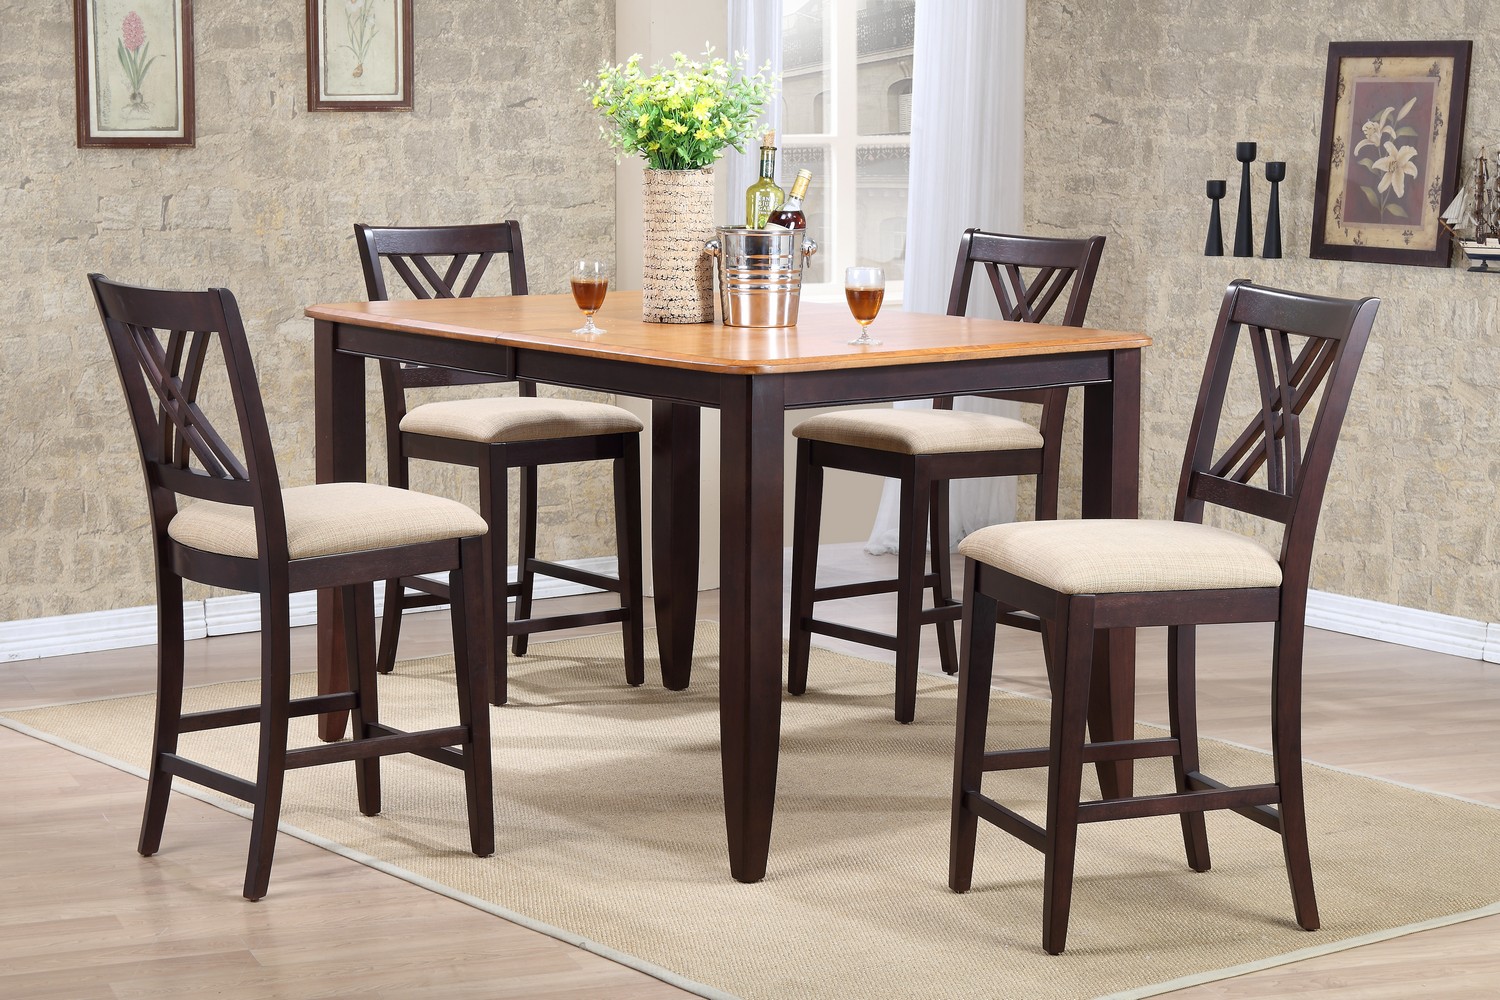 Iconic Furniture RT78 Whiskey/Mocha Double X- Back Counter Height Dining Set